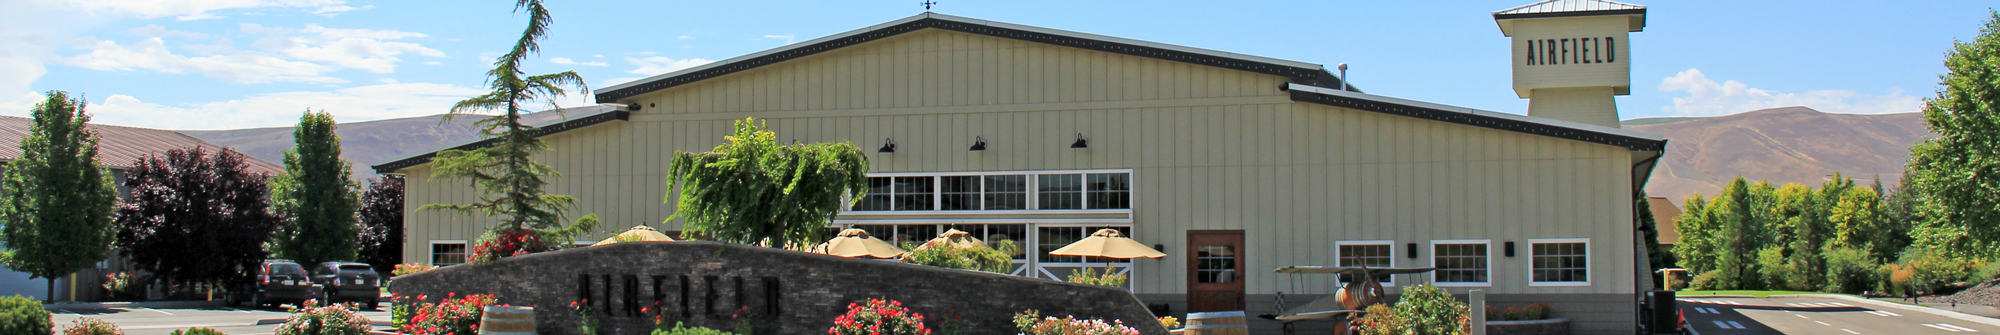 Join us in our Tasting Room or at the Winery for an experience tailored to your group!